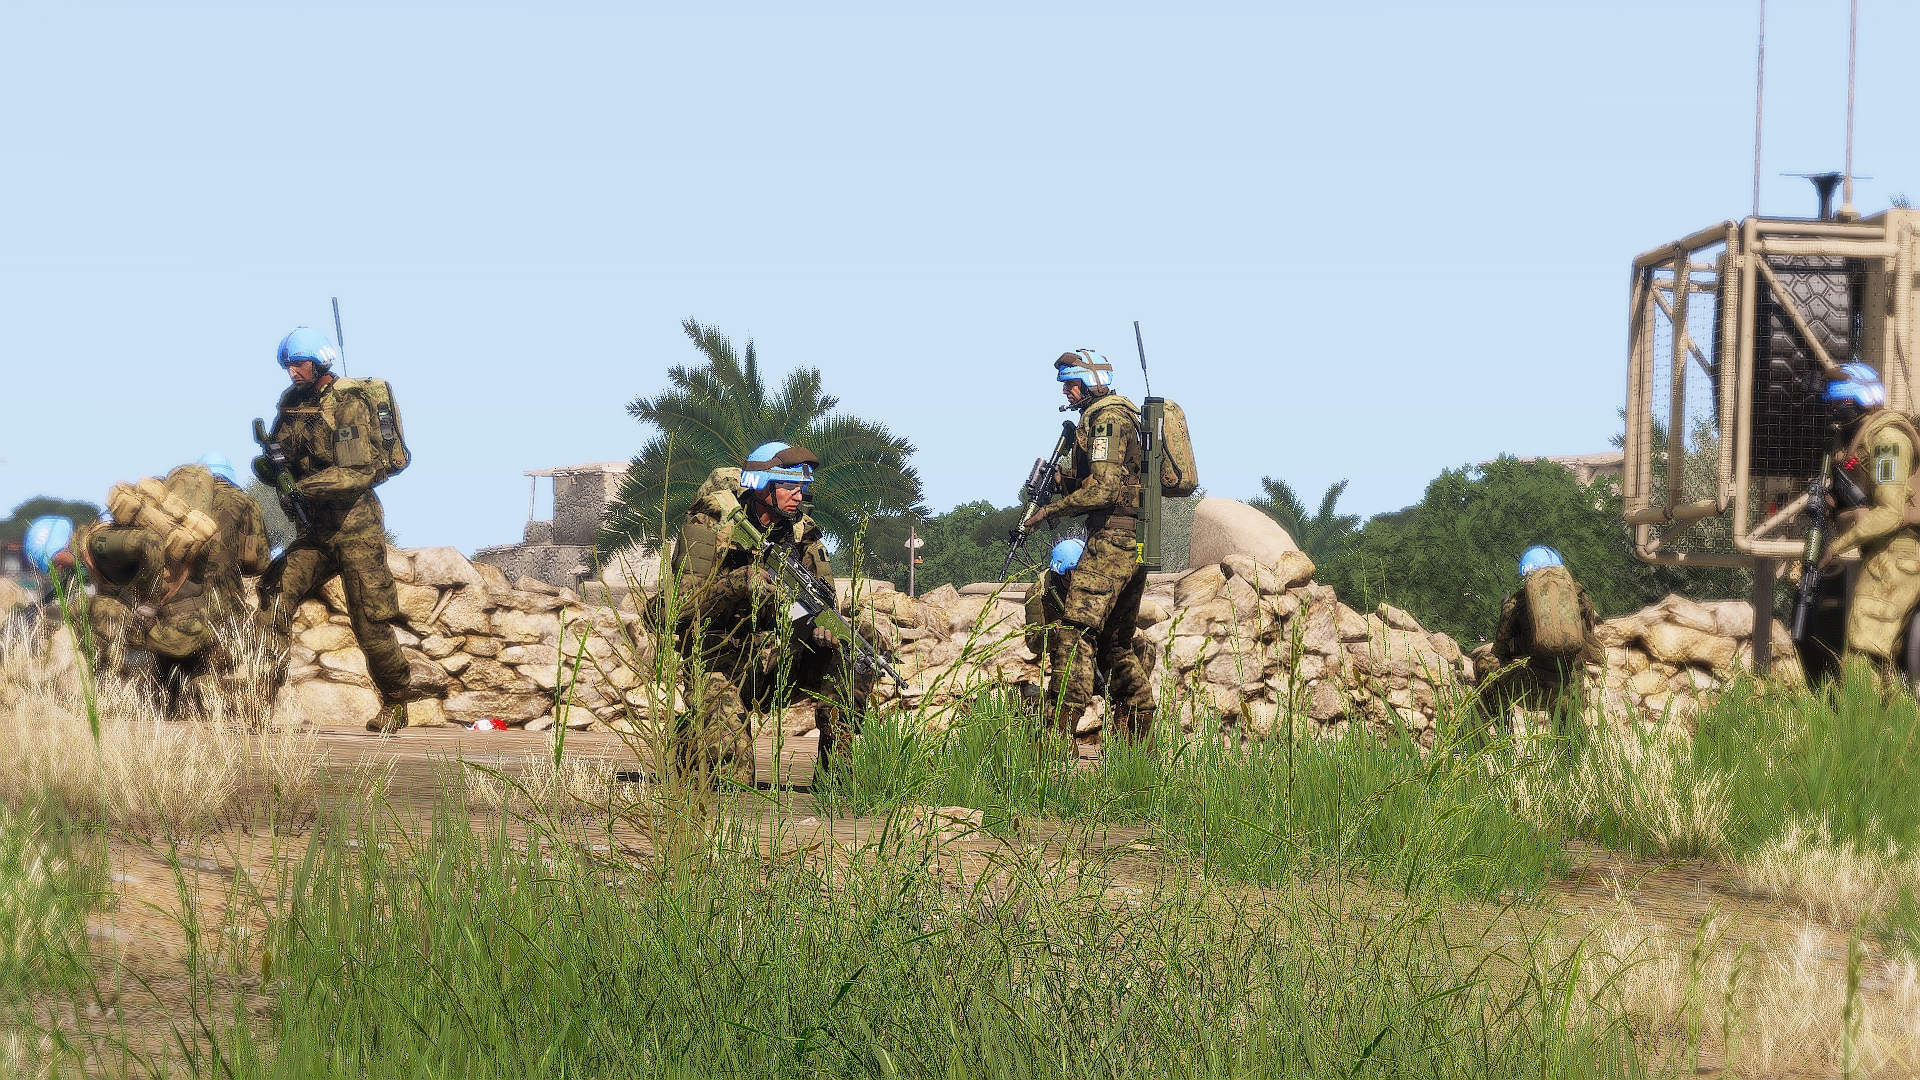 Canadian peacekeepers in 360 formation on a patrol (FICTIONAL MILSIM)